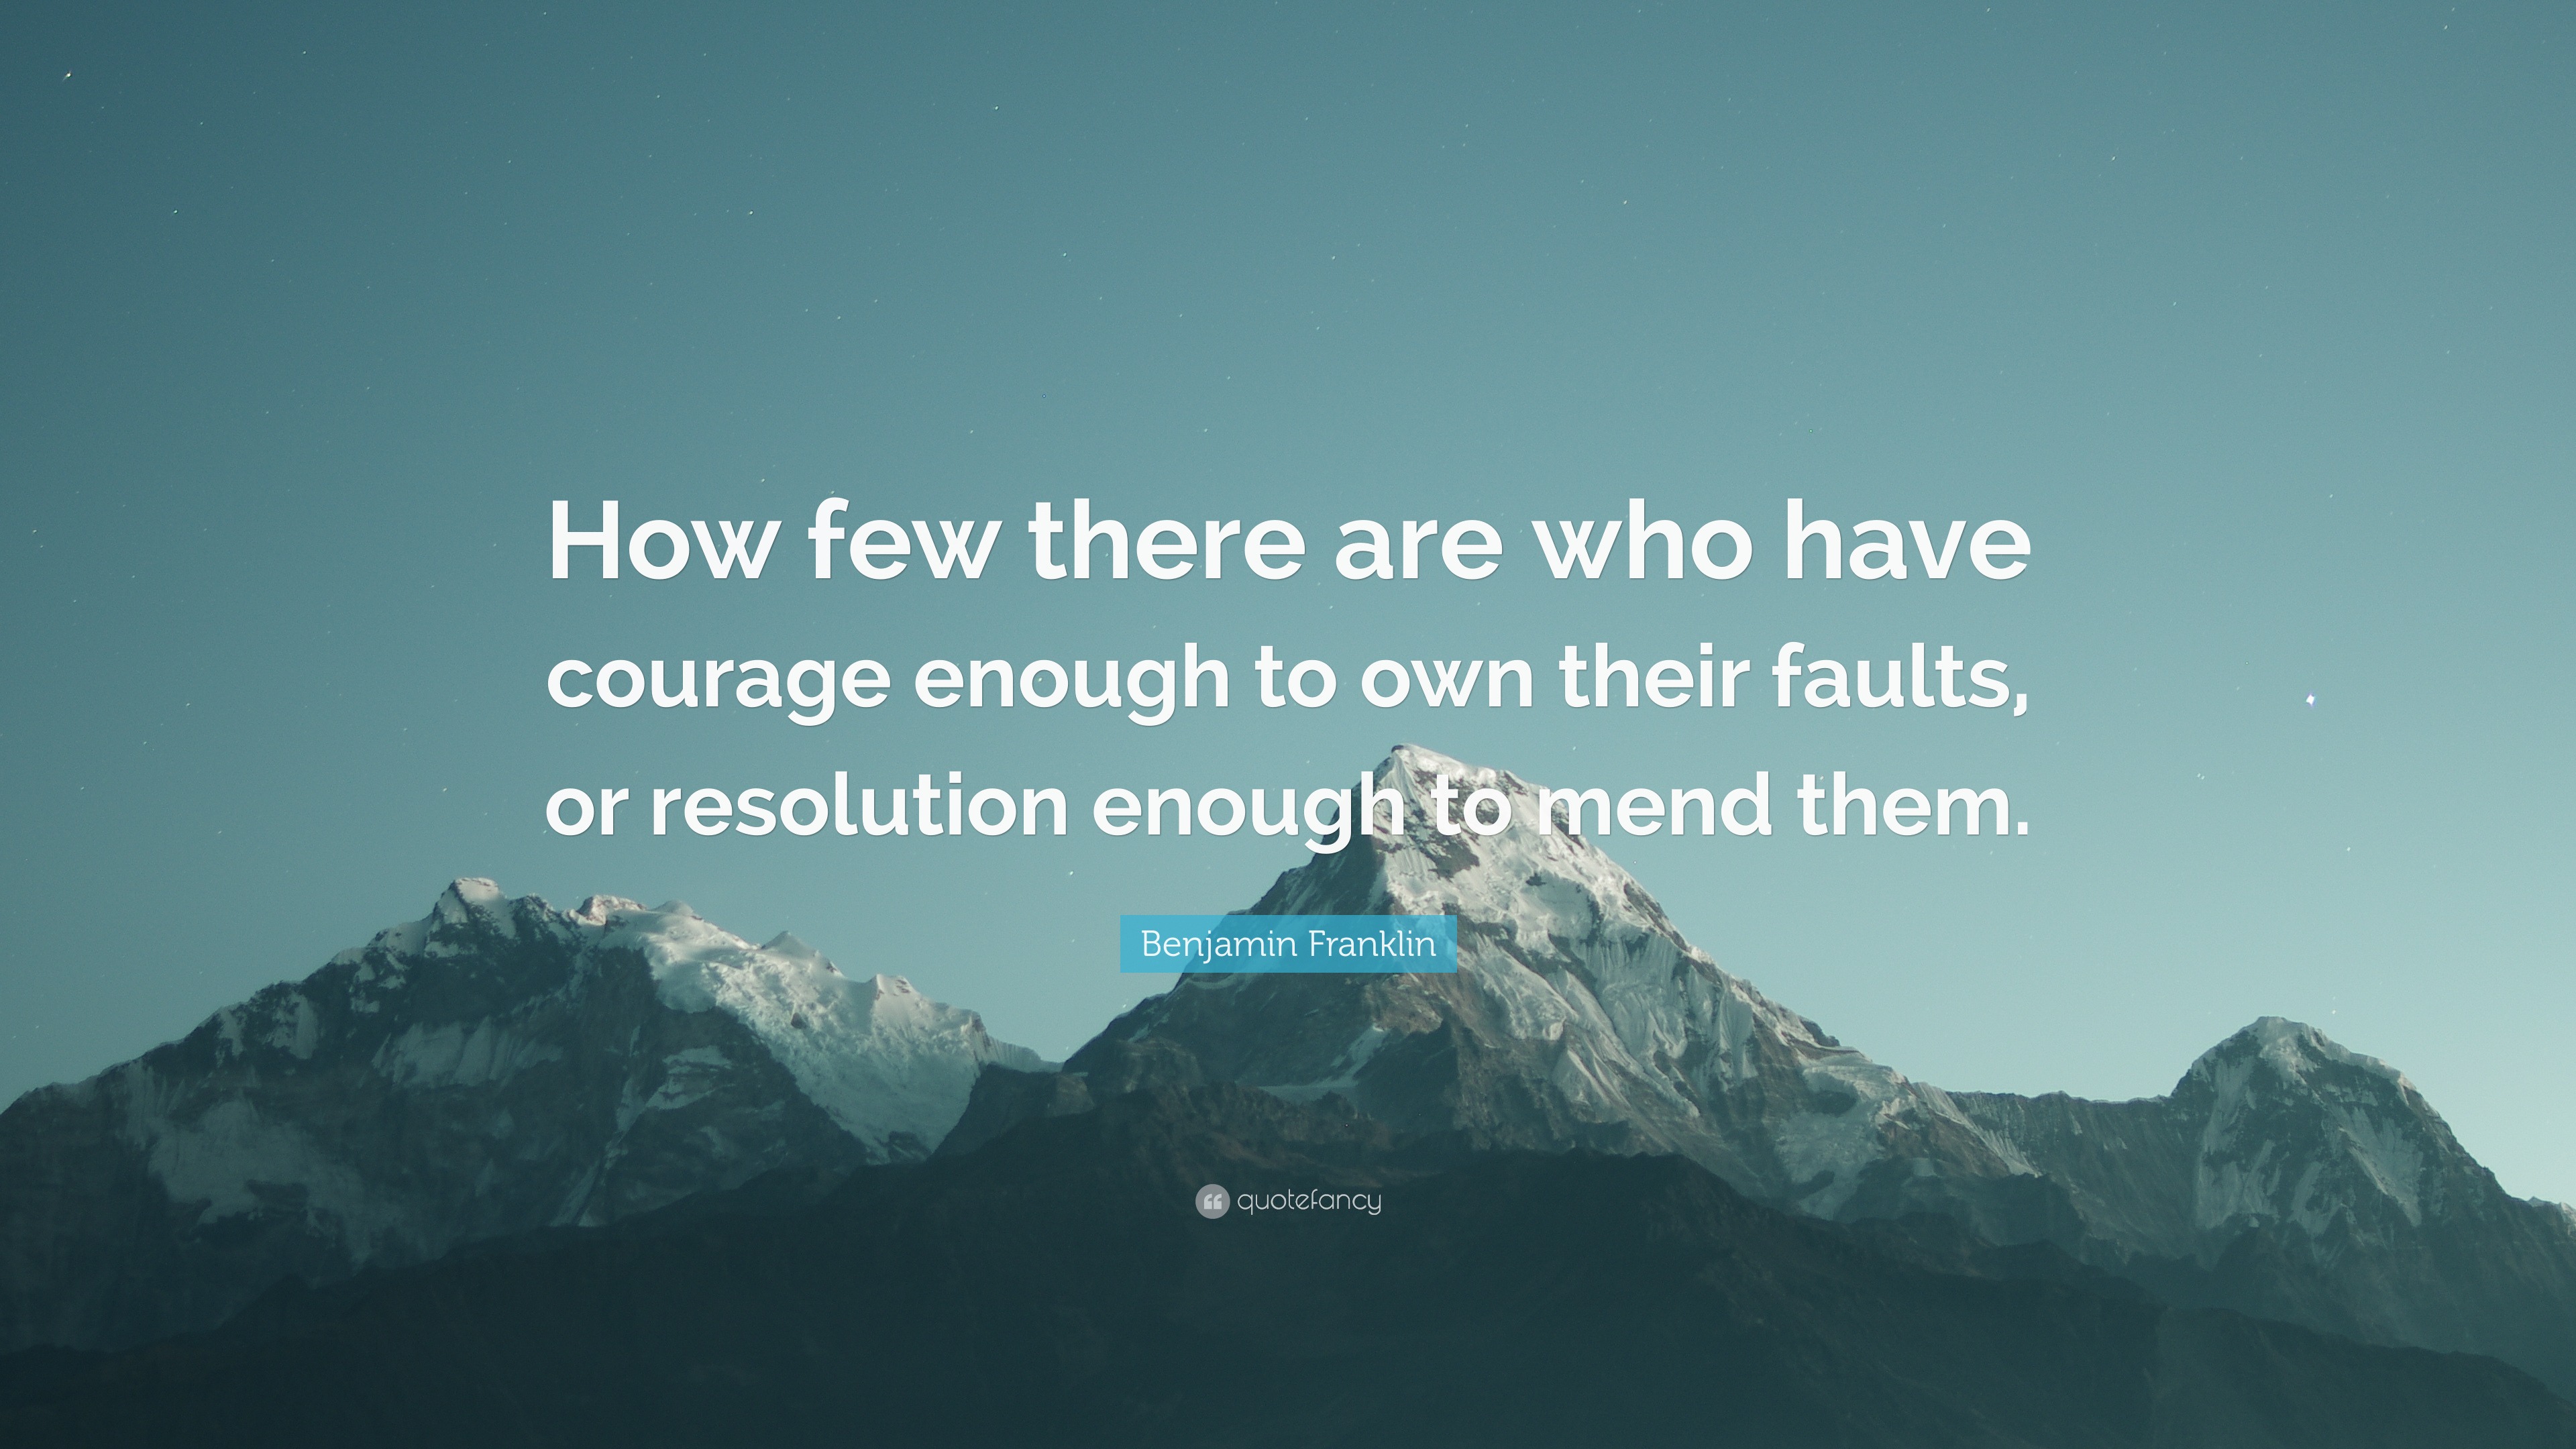 Benjamin Franklin Quote: “How few there are who have courage enough to ...